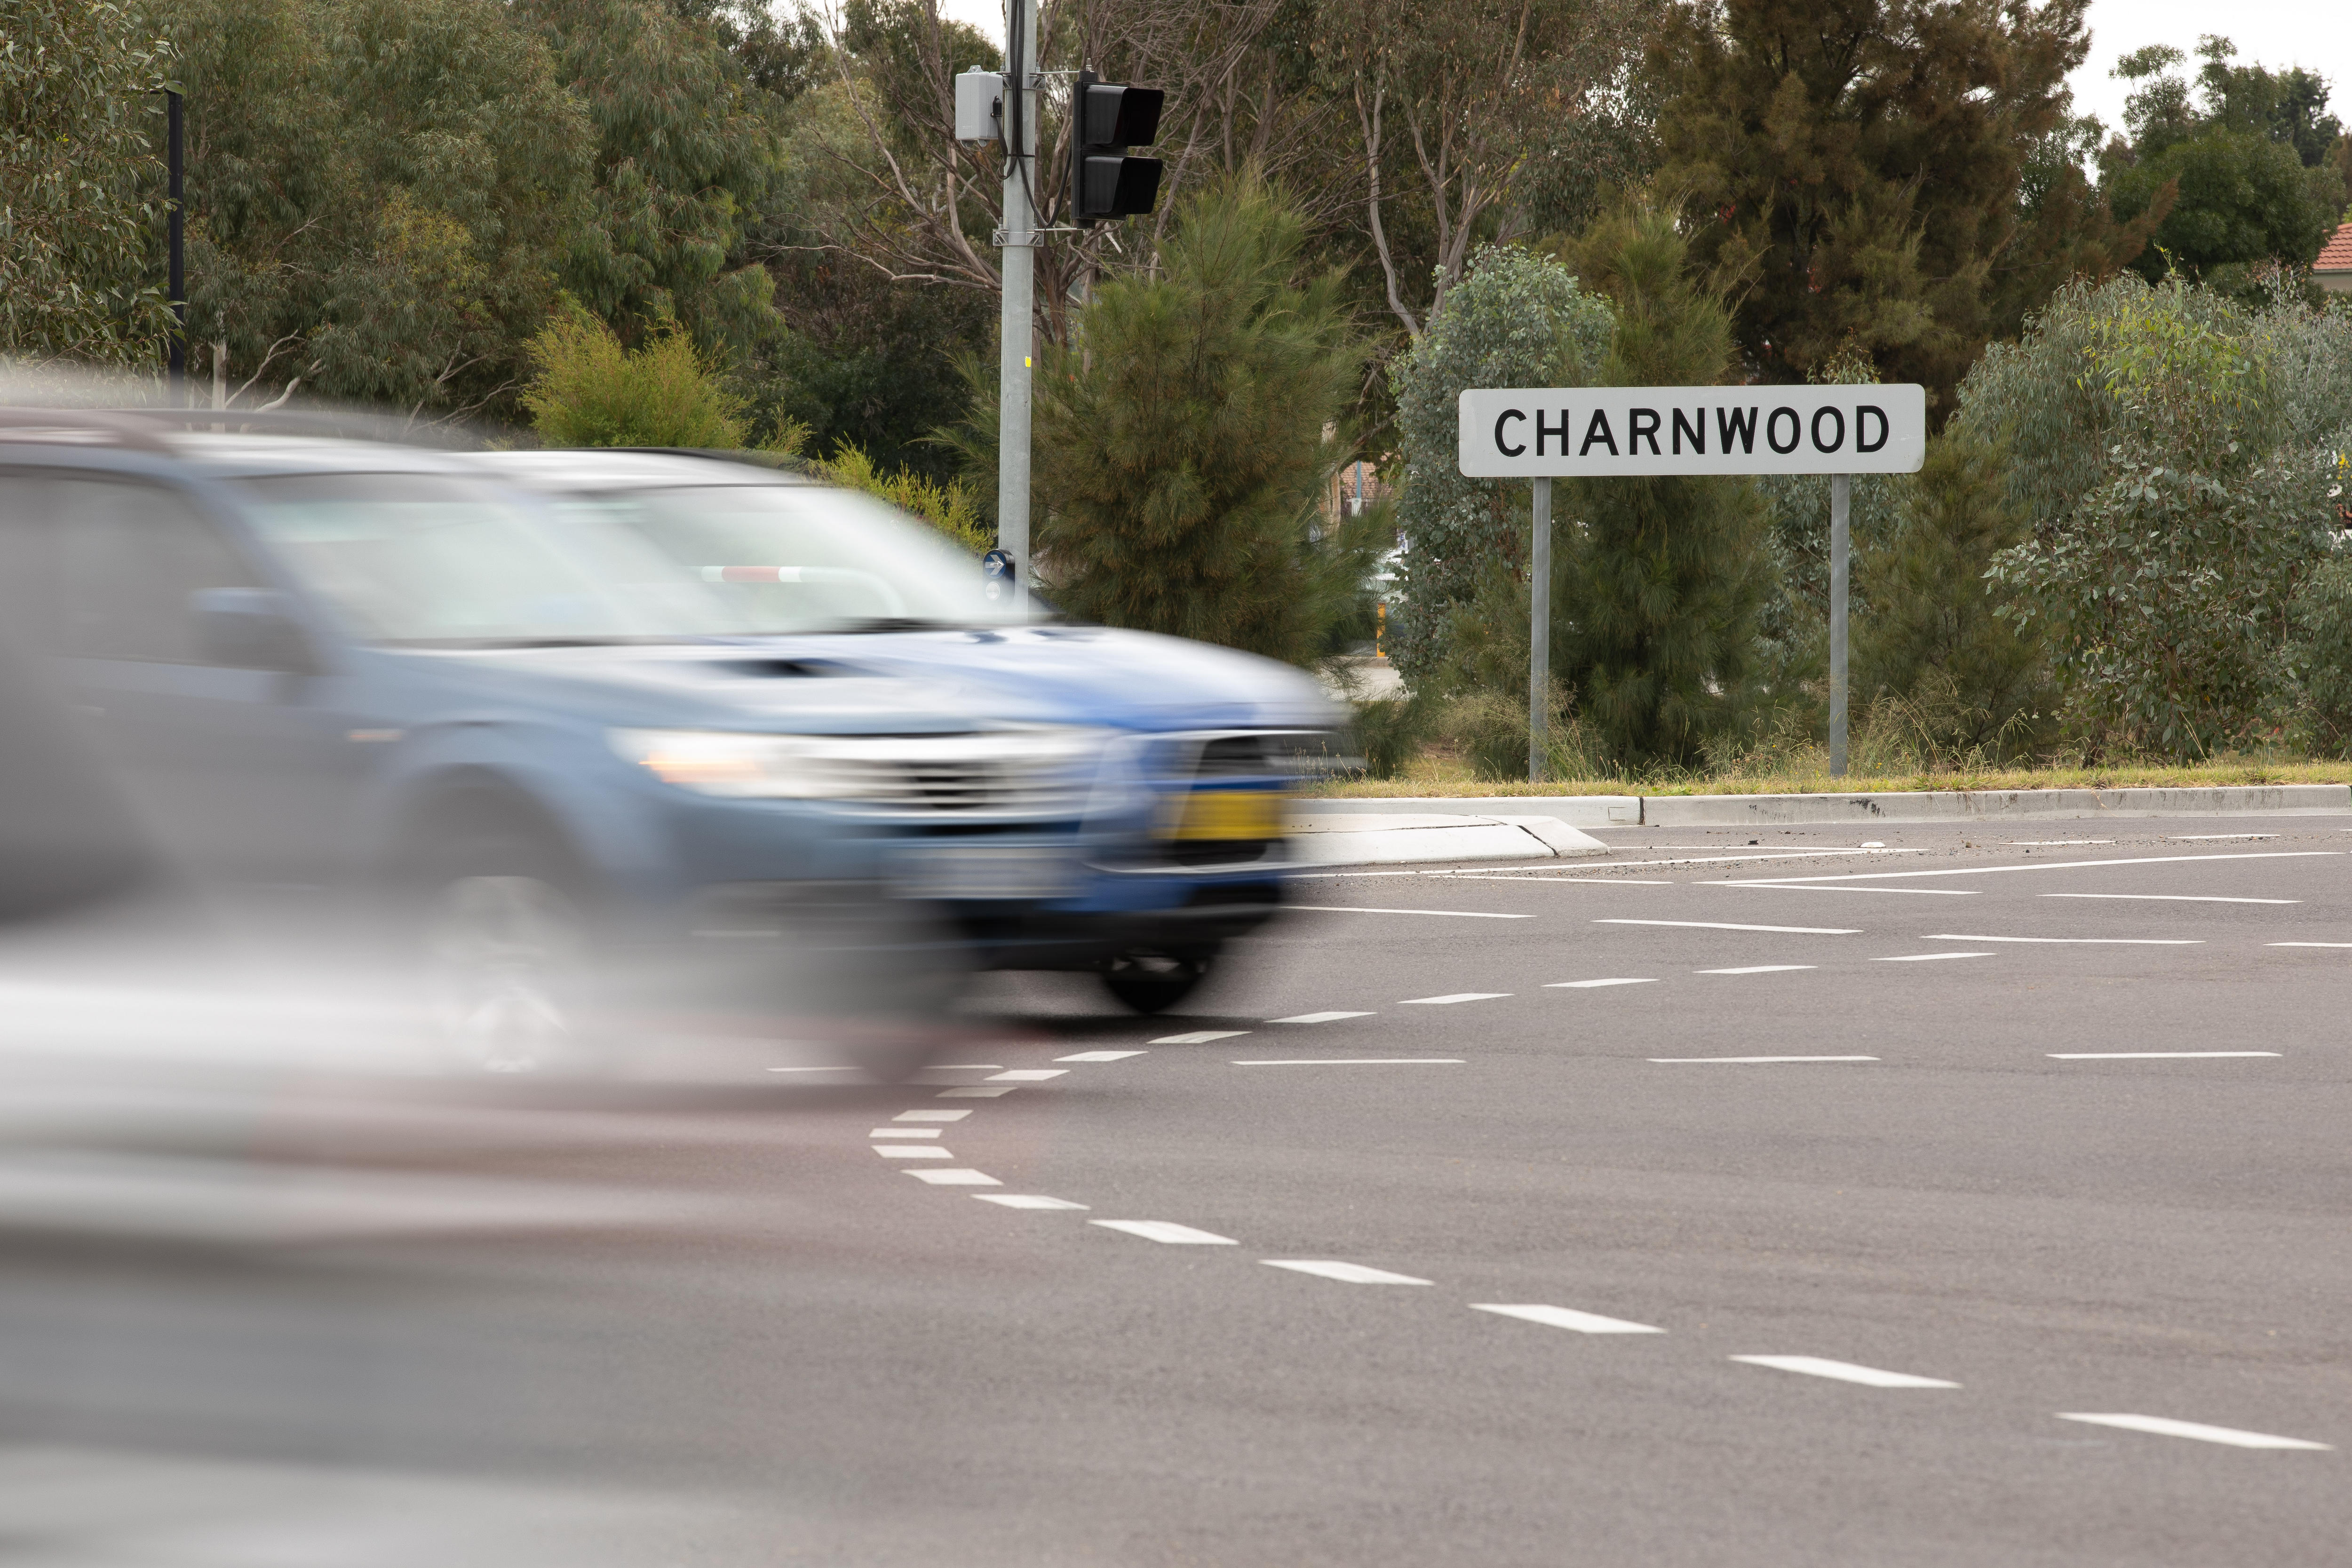 A grey car drives past a Charnwood sign.